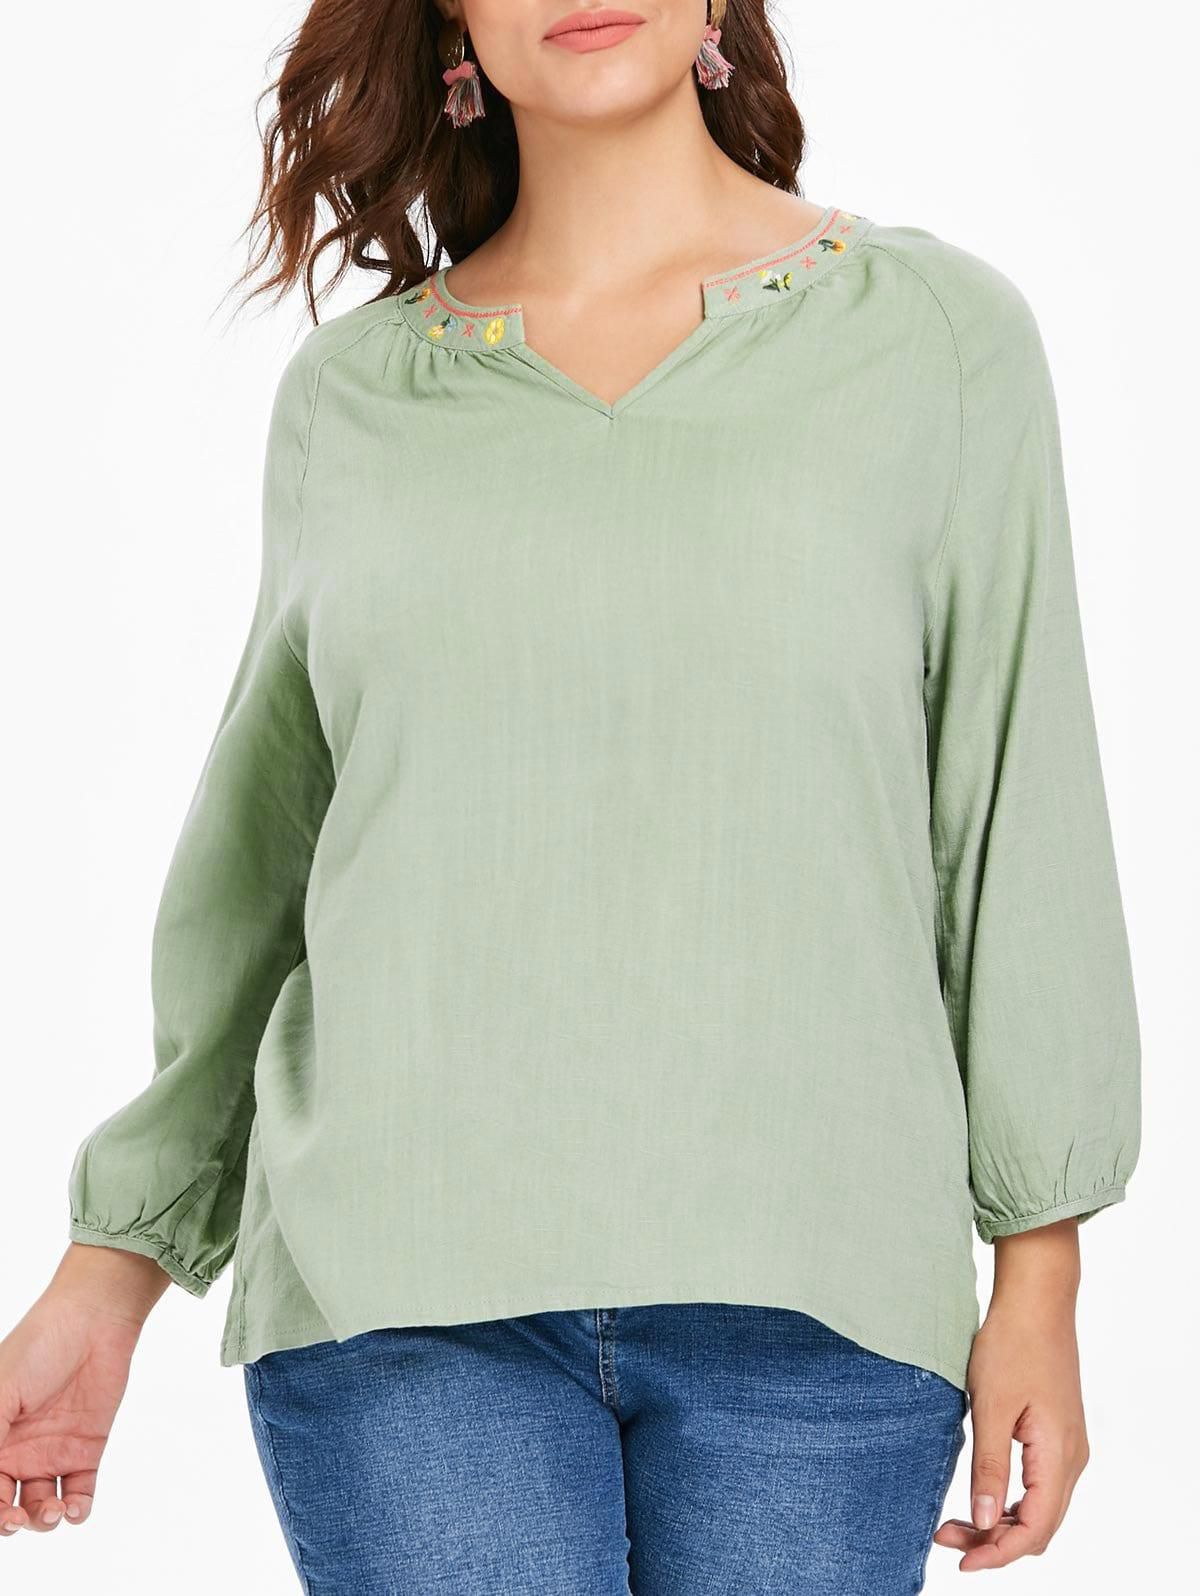 Plus Size Embroidered High Low Blouse - 1x